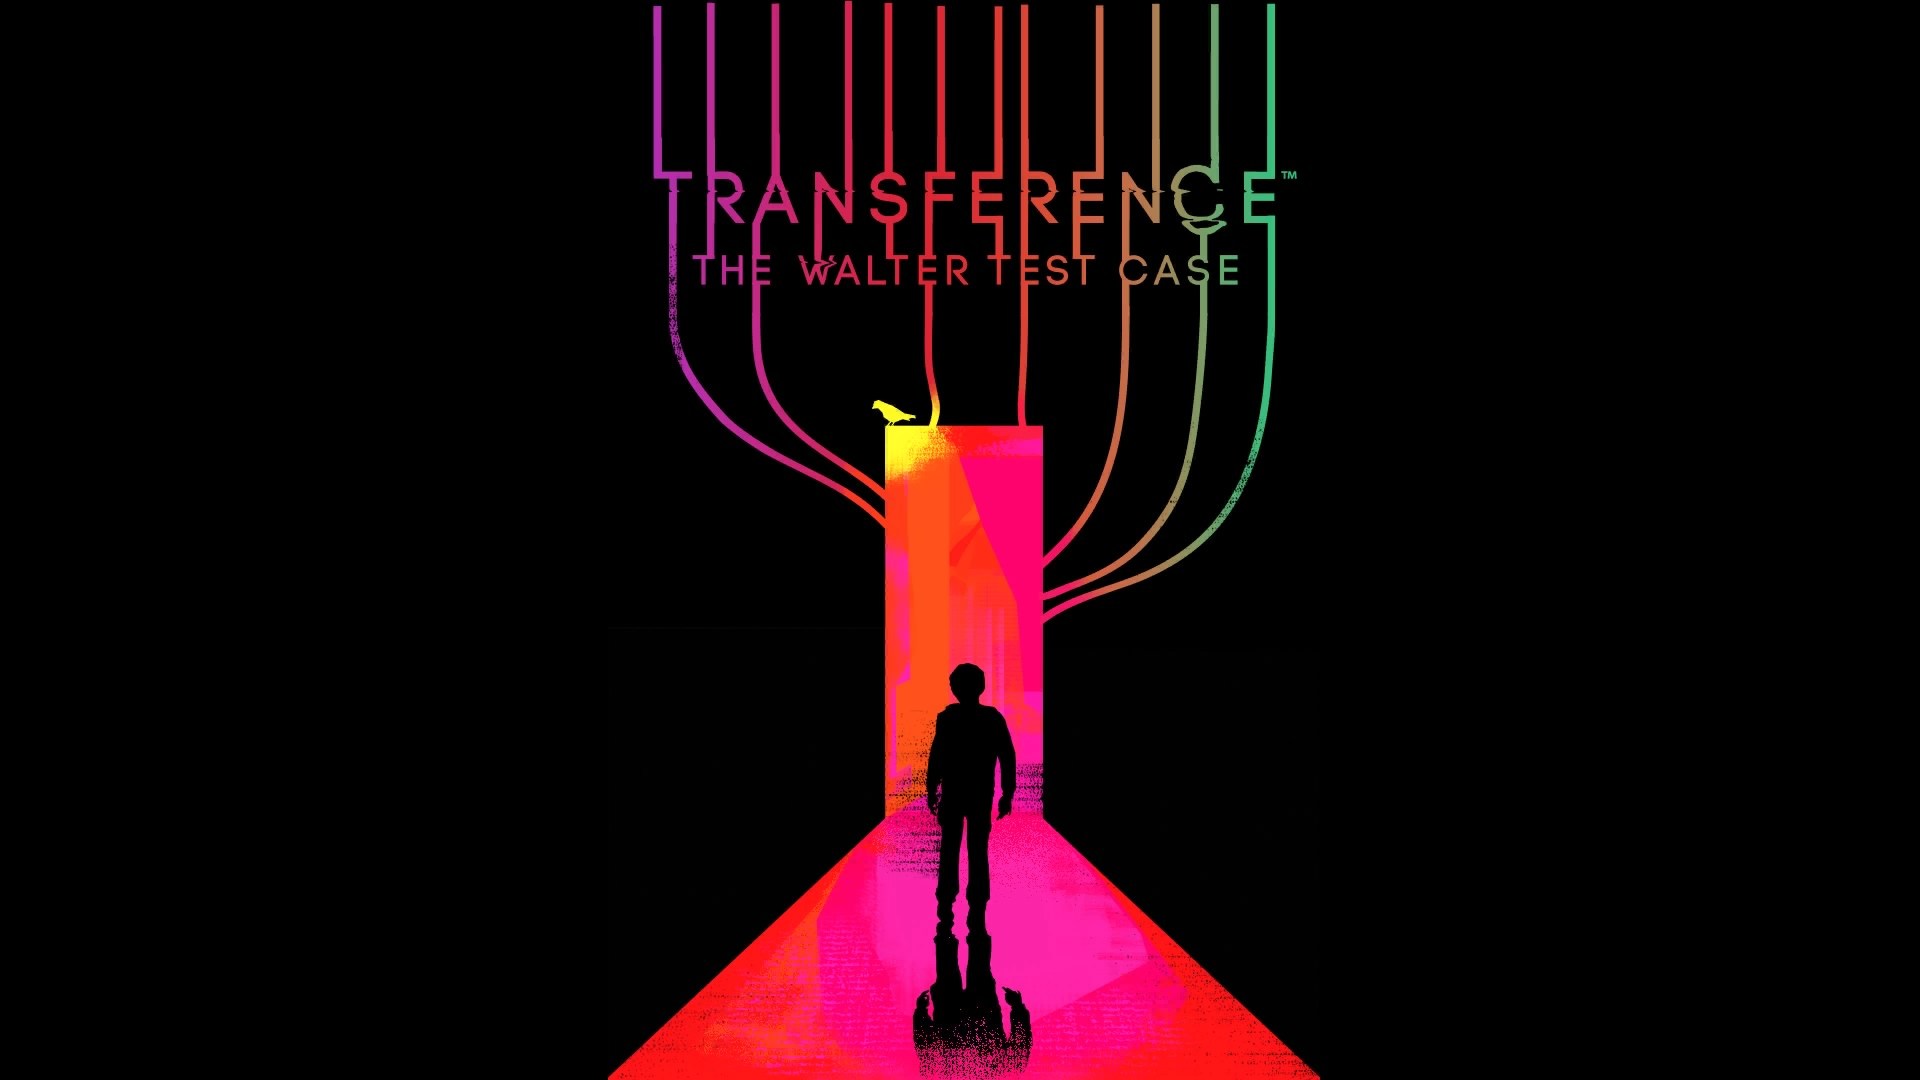 Transference: The Walter Test Case